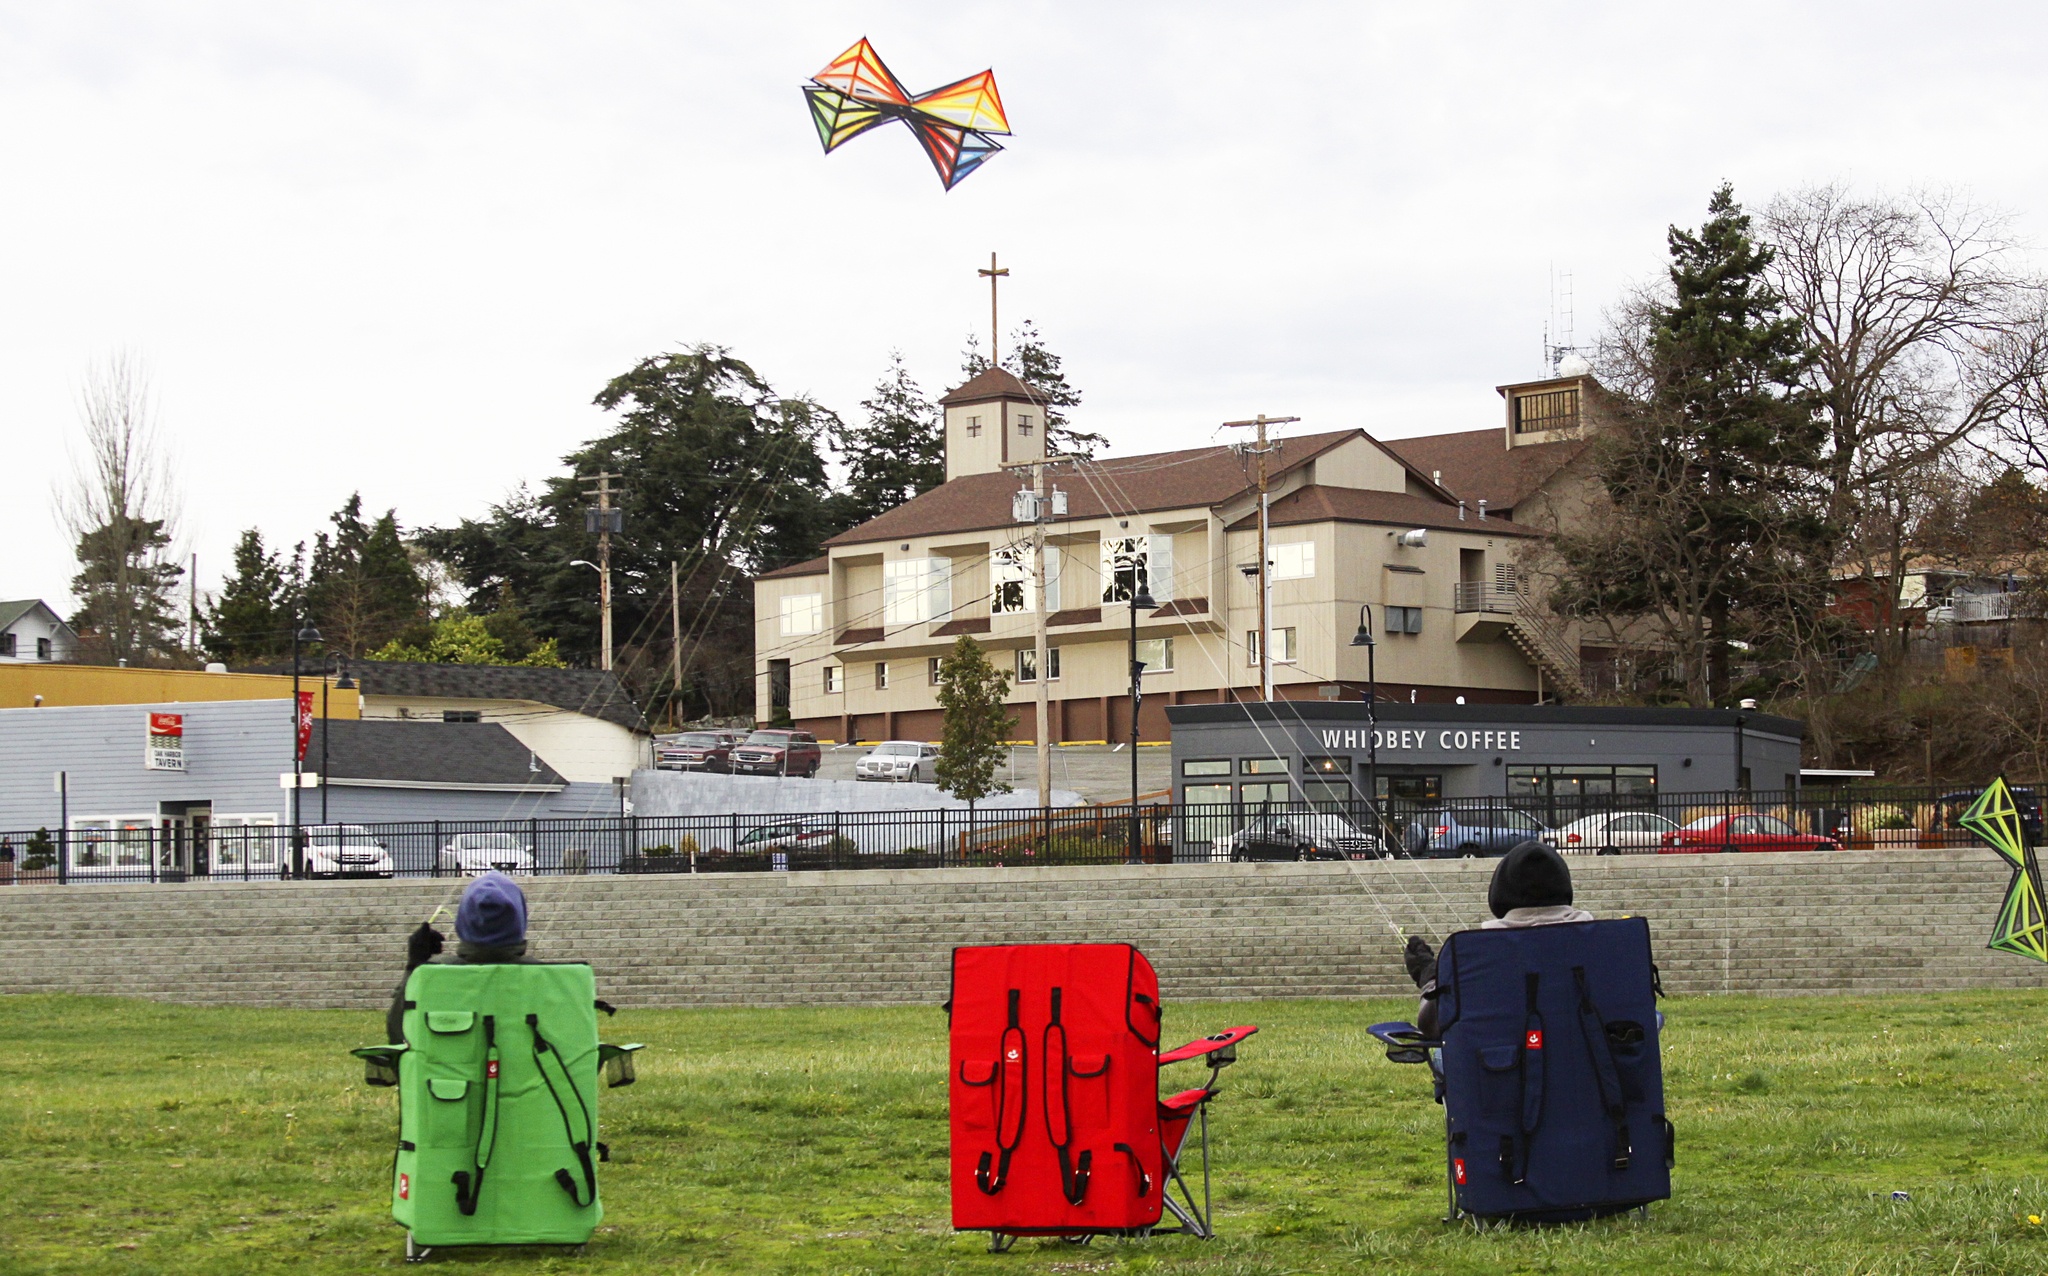 Kite fliers demonstrate tricks on the open field off Bayshore Drive in downtown Oak Harbor Thursday. Photo by Ron Newberry/Whidbey News-Times